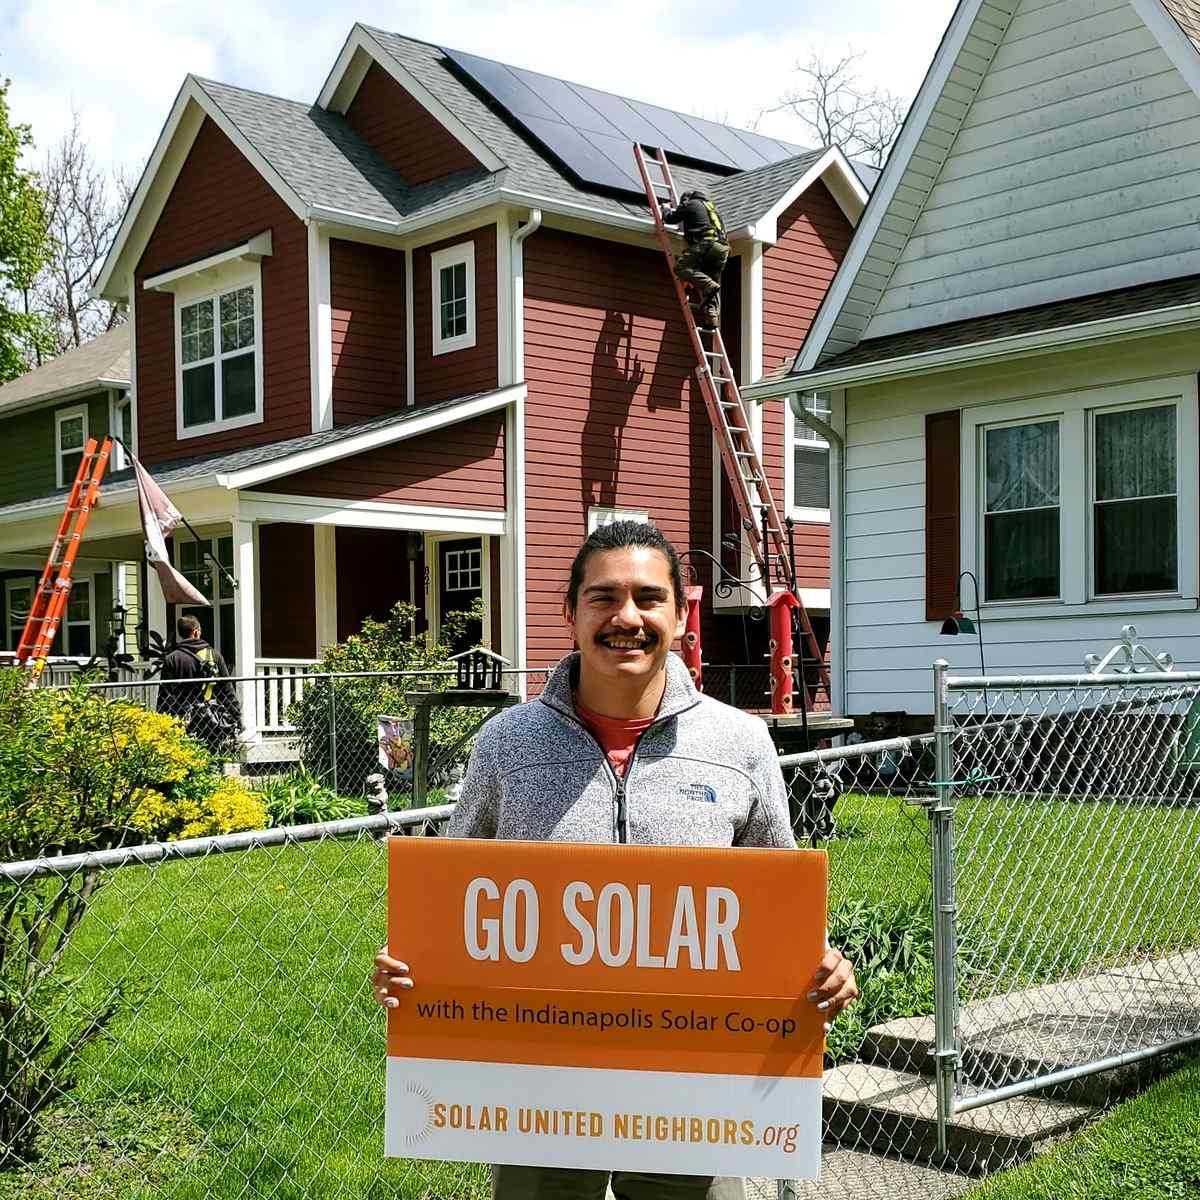 Man holding "Go solar" sign while installers add solar panels to house rooftop behind him.